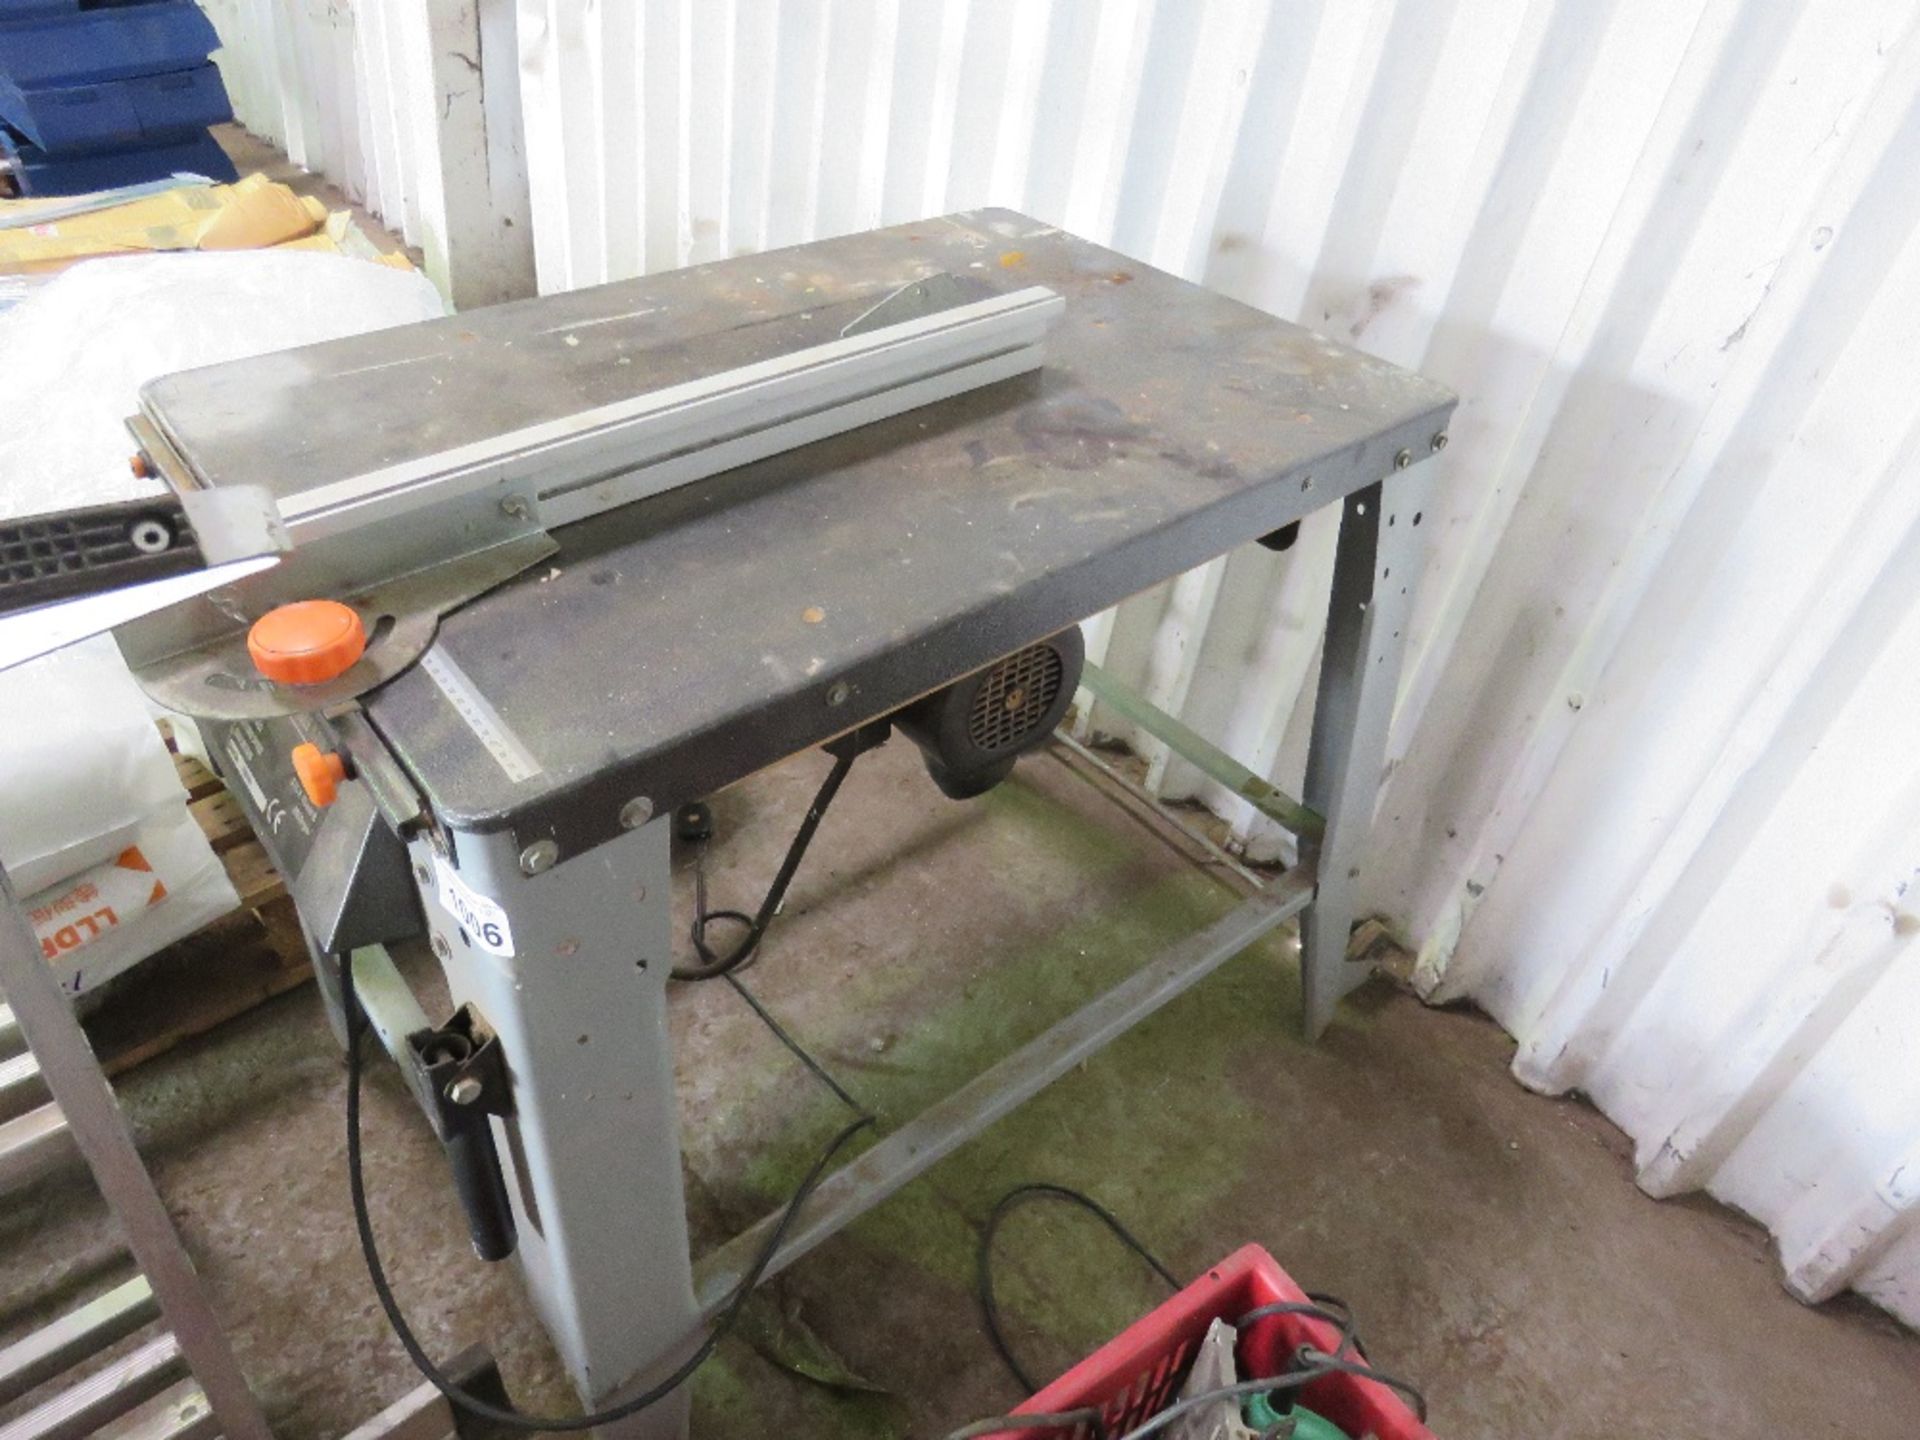 1600WATT RATED 240VOLT TABLE SAW. UNTESTED, CONDITION UNKNOWN NO VAT ON HAMMER PRICE.